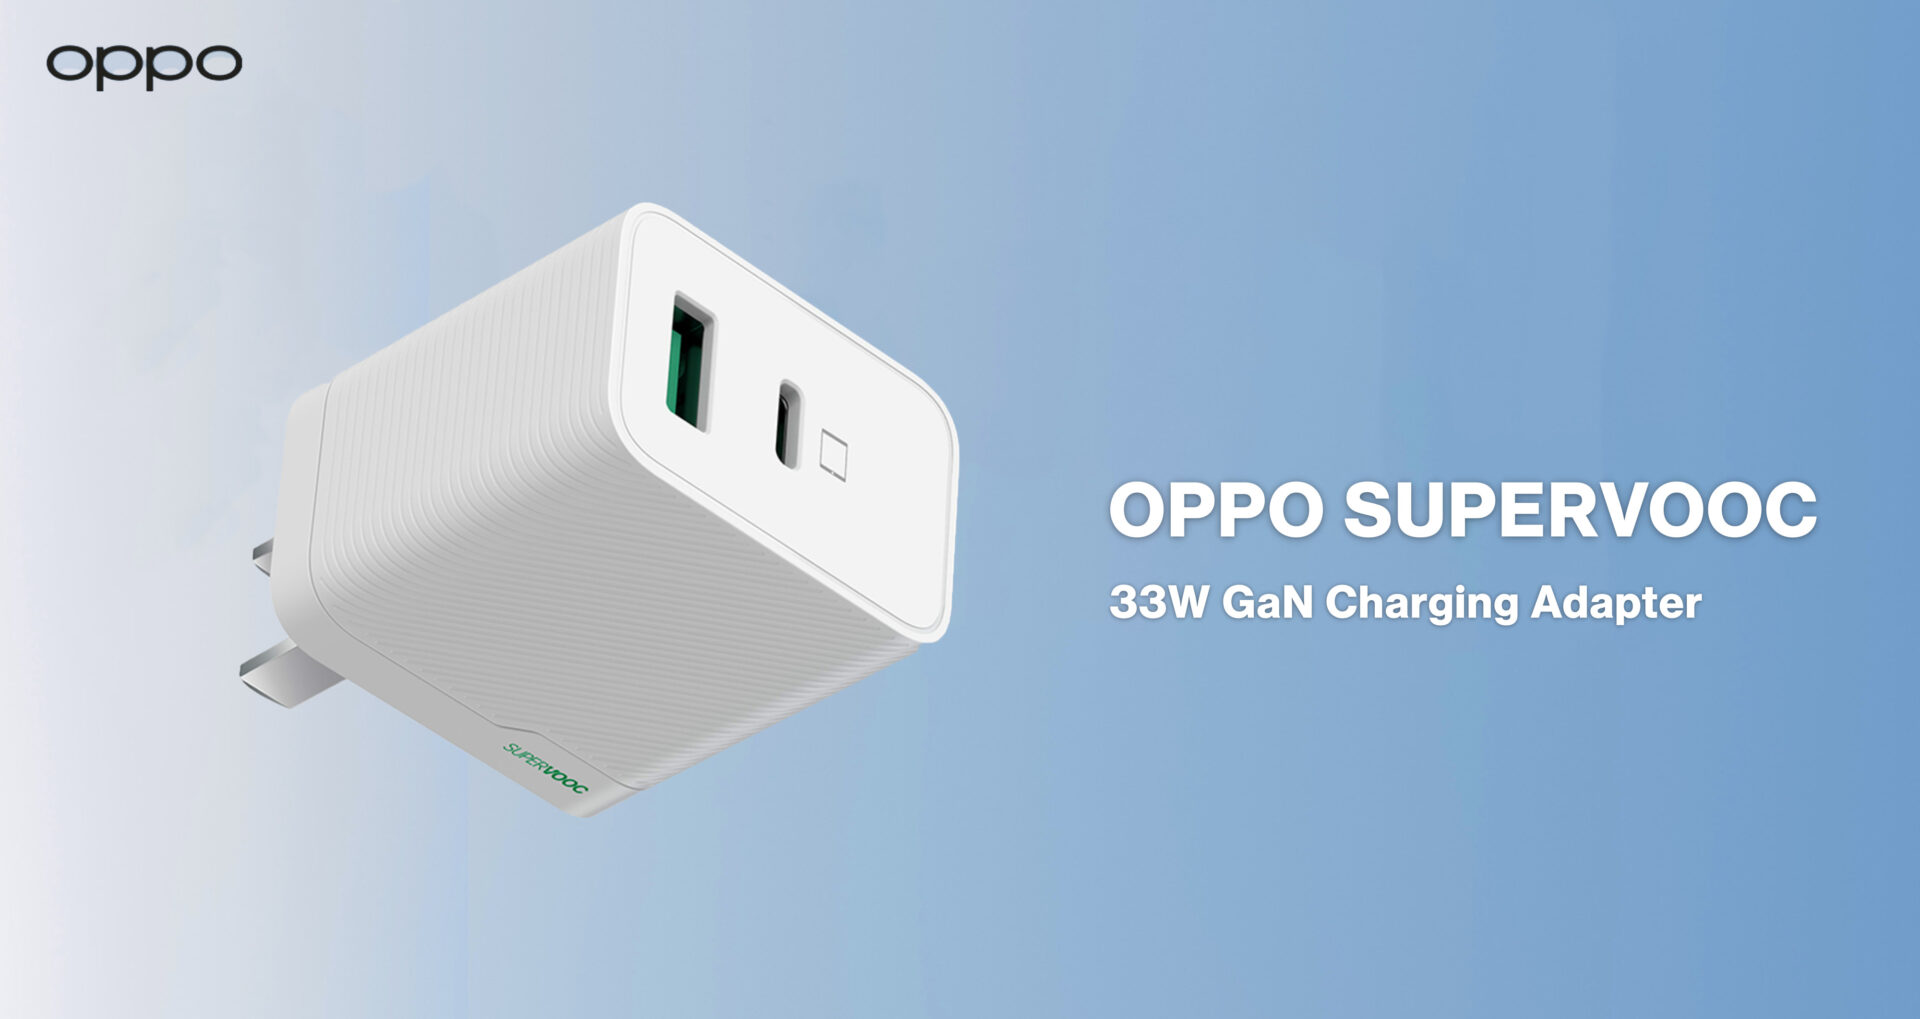 OPPO SUPERVOOC 33W introduced with multiple charging protocols!